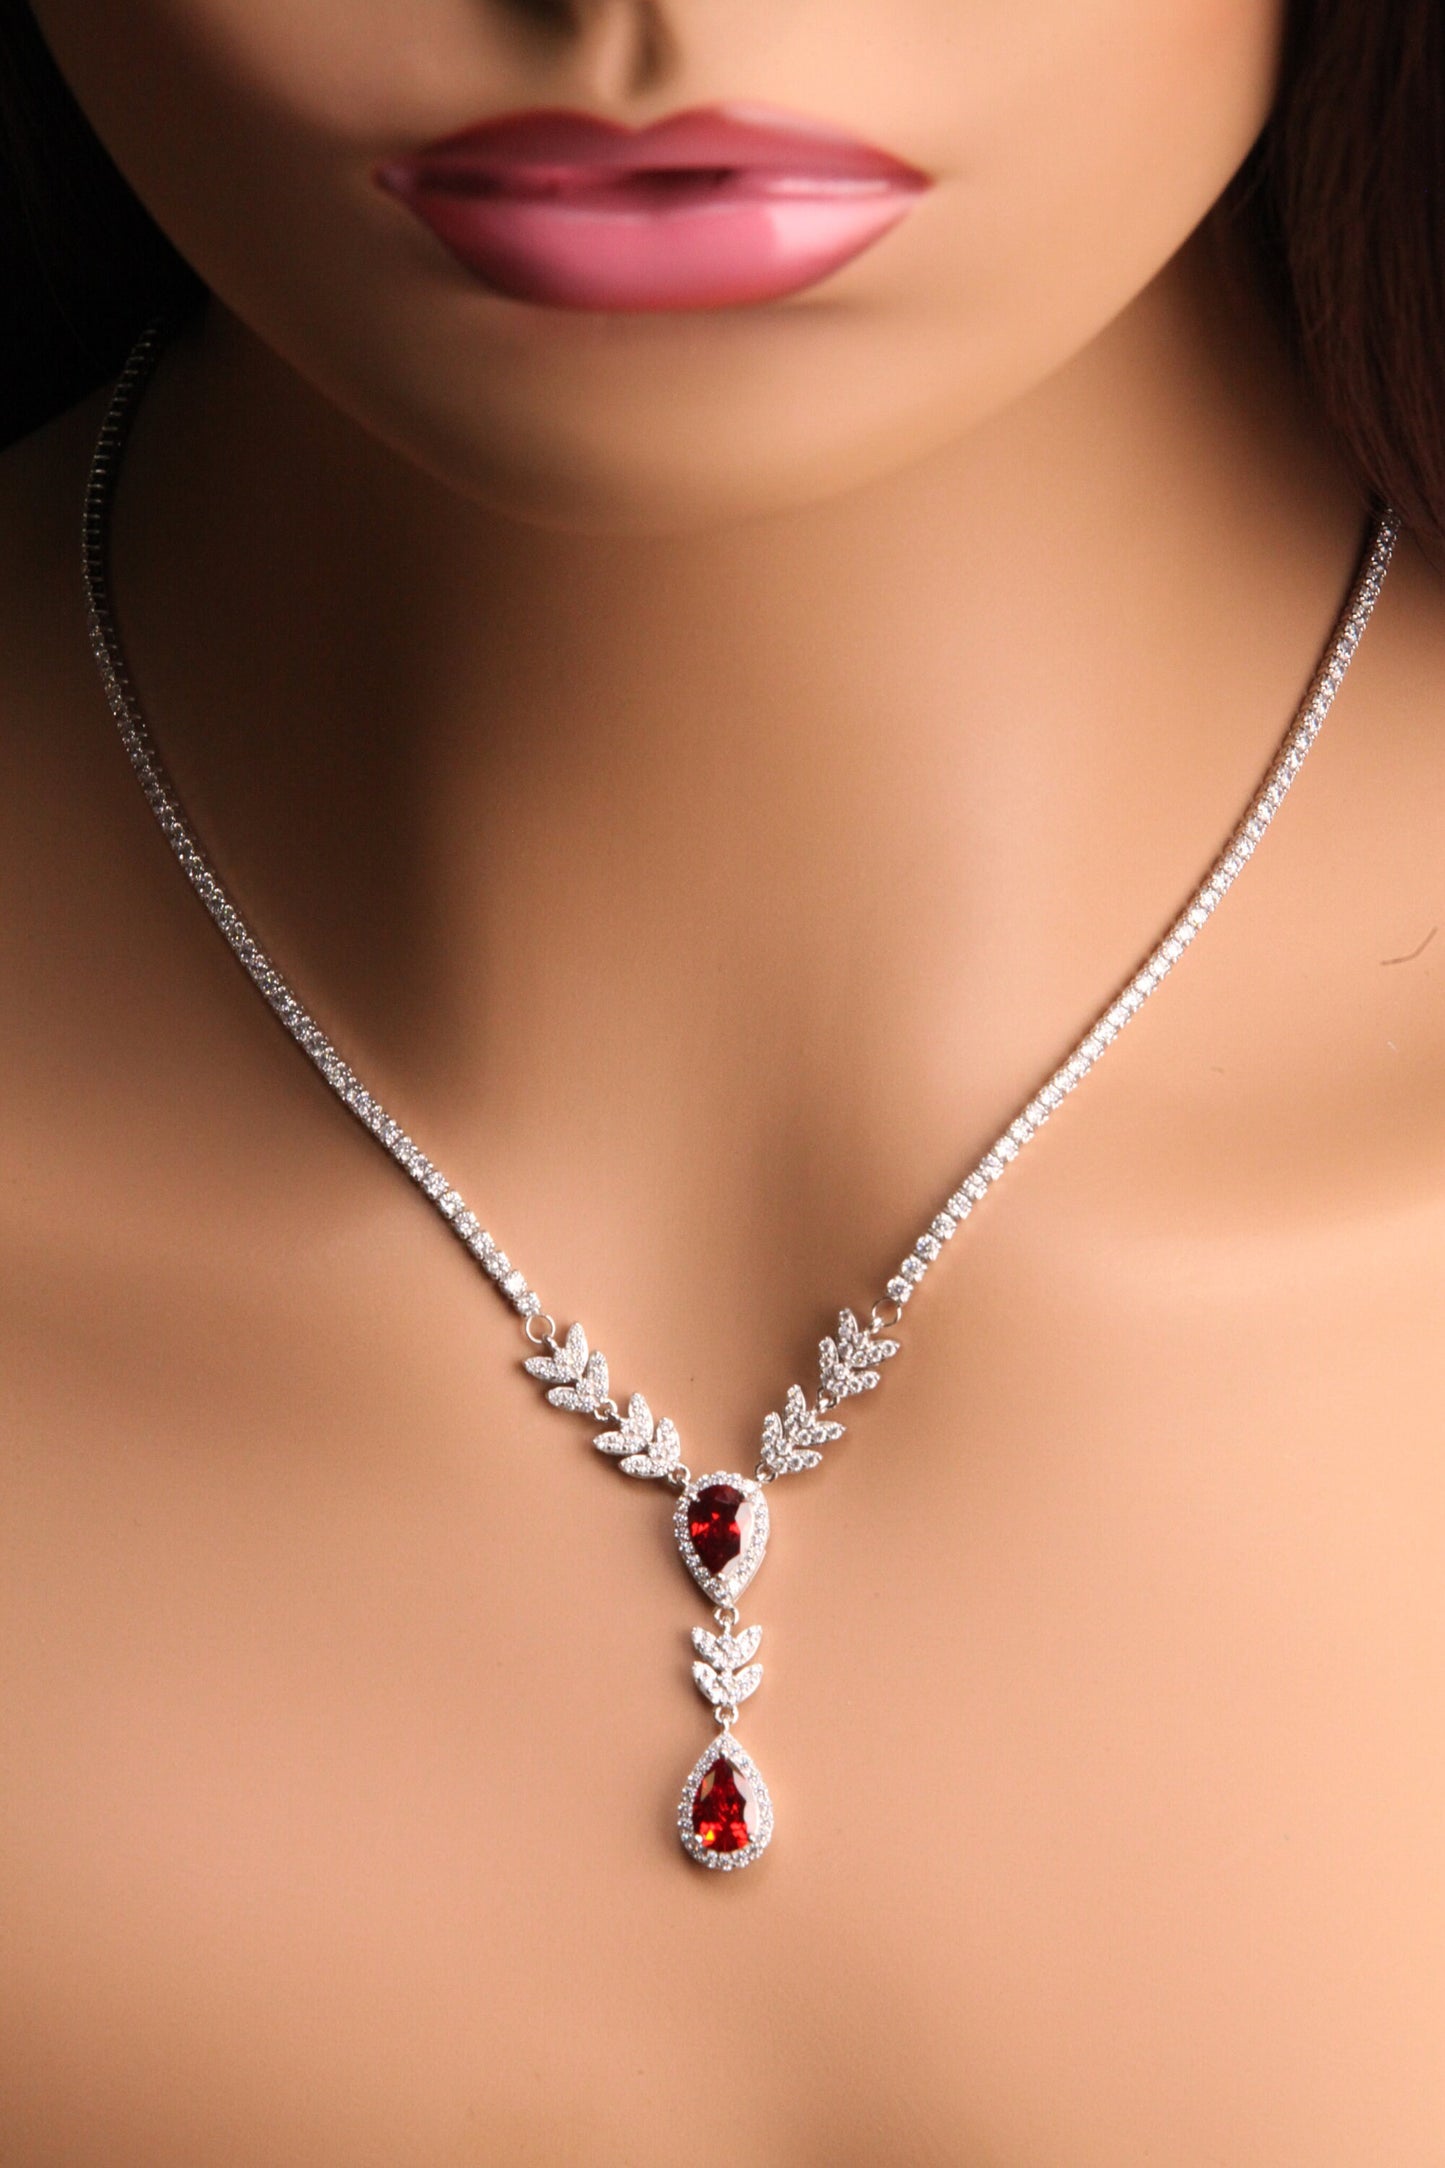 925 Sterling Silver Garnet Teadrop 8x12mm dangling CZ diamond setting tennis chain elegant Y Necklace gift , 925 stamped, gift for her